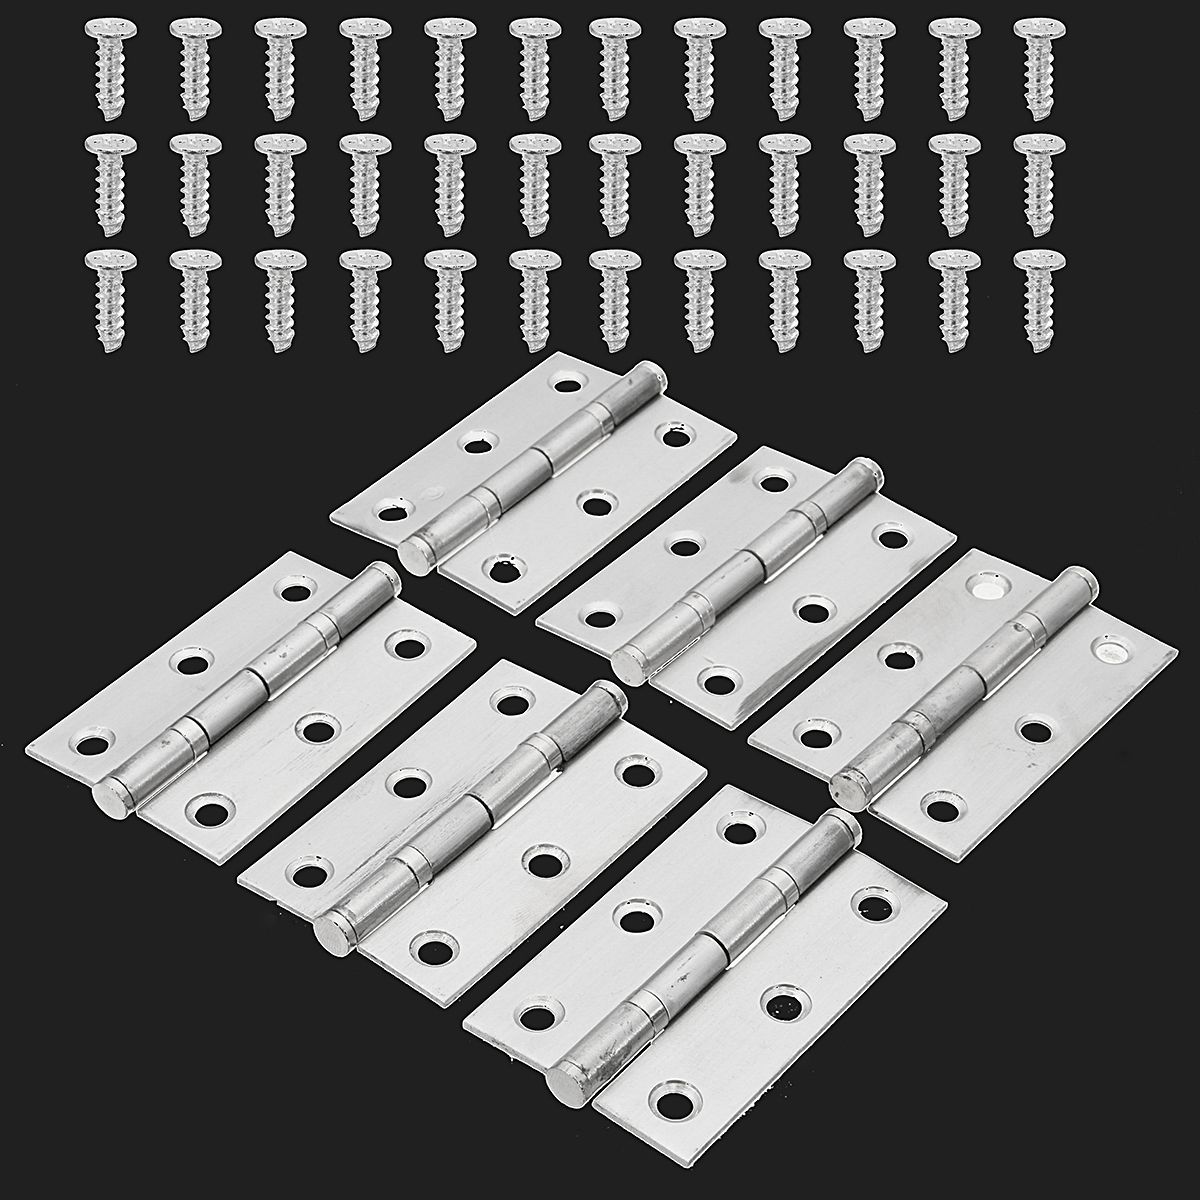 6Pcs-25Inch-Stainless-Steel-Boat-Marine-Cabinet-Butt-Hinge-With-Screws-1114196